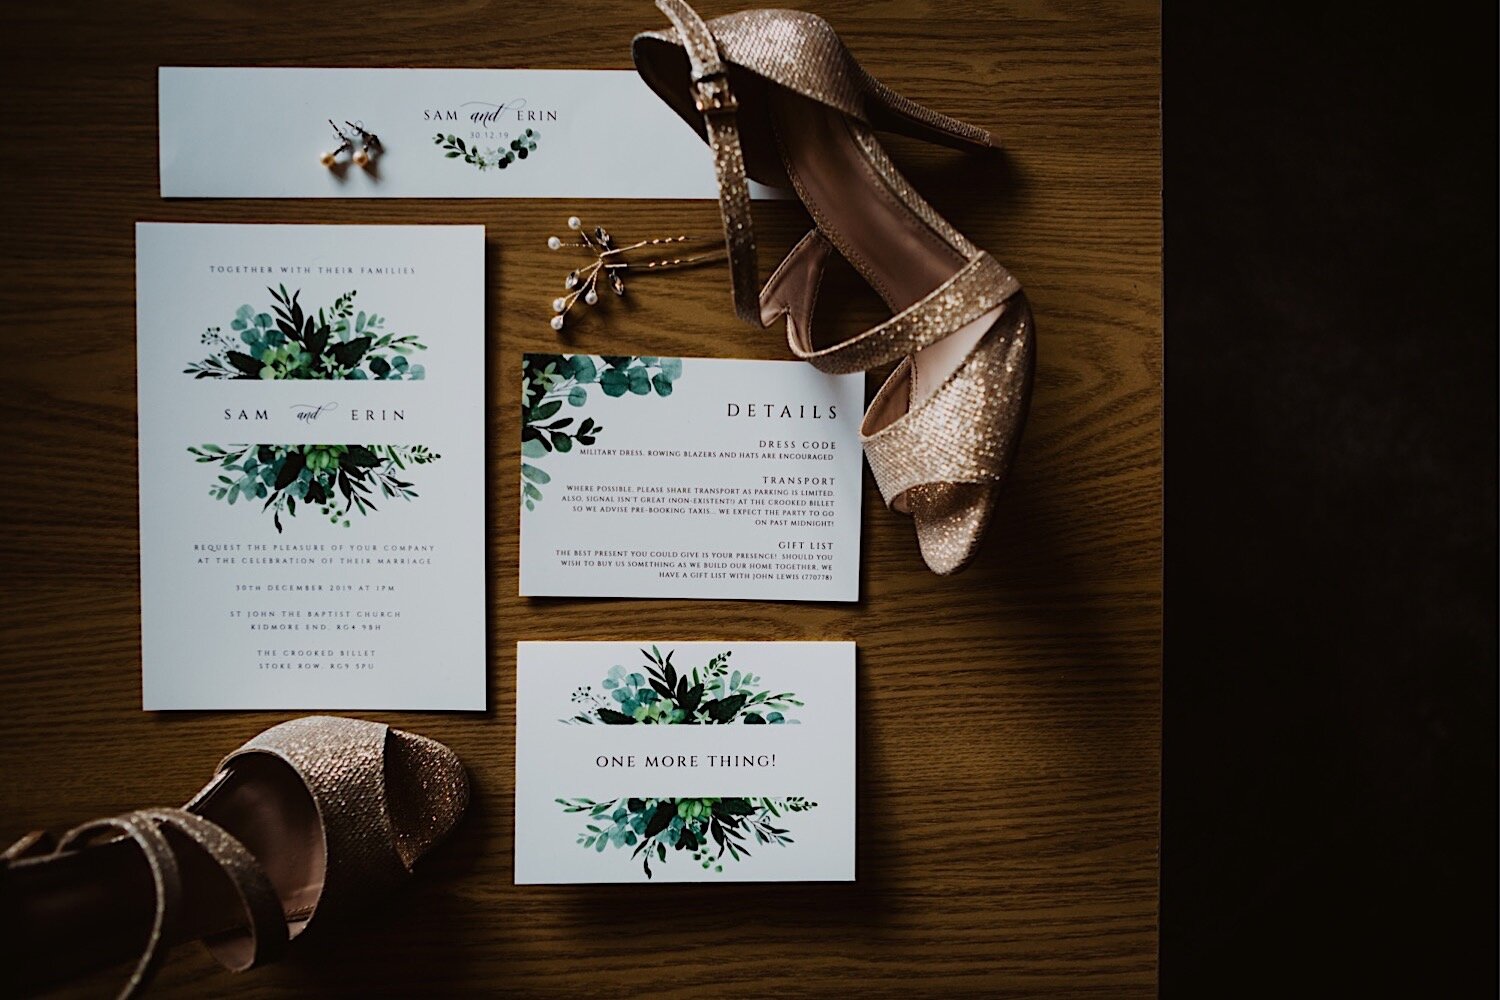 006_TWS-5_bride_ready_photography_henley_details_millitary_oxfordshire_bridalprep_shoes_stationery_crooked_wedding_getting_groom_winter_billet.jpg